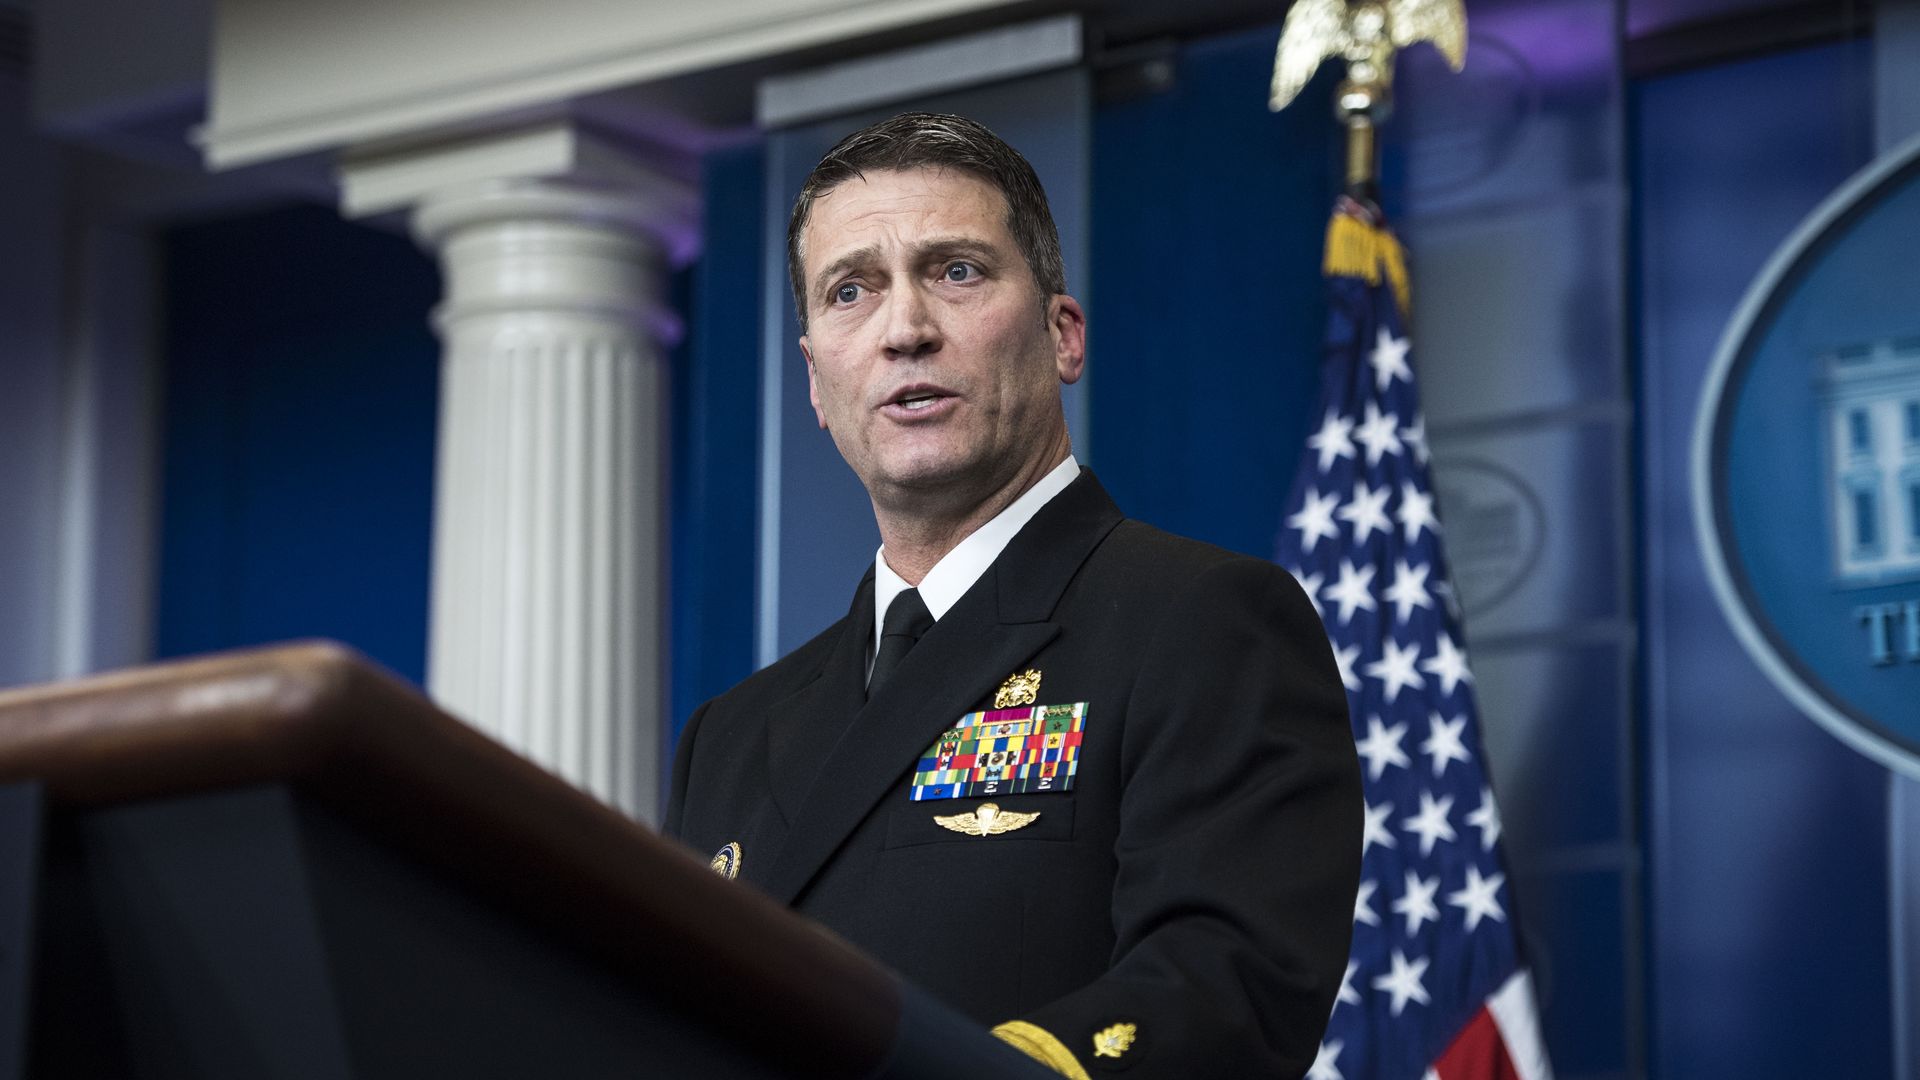 Ronny Jackson speaks behind a podium in the White House briefing room